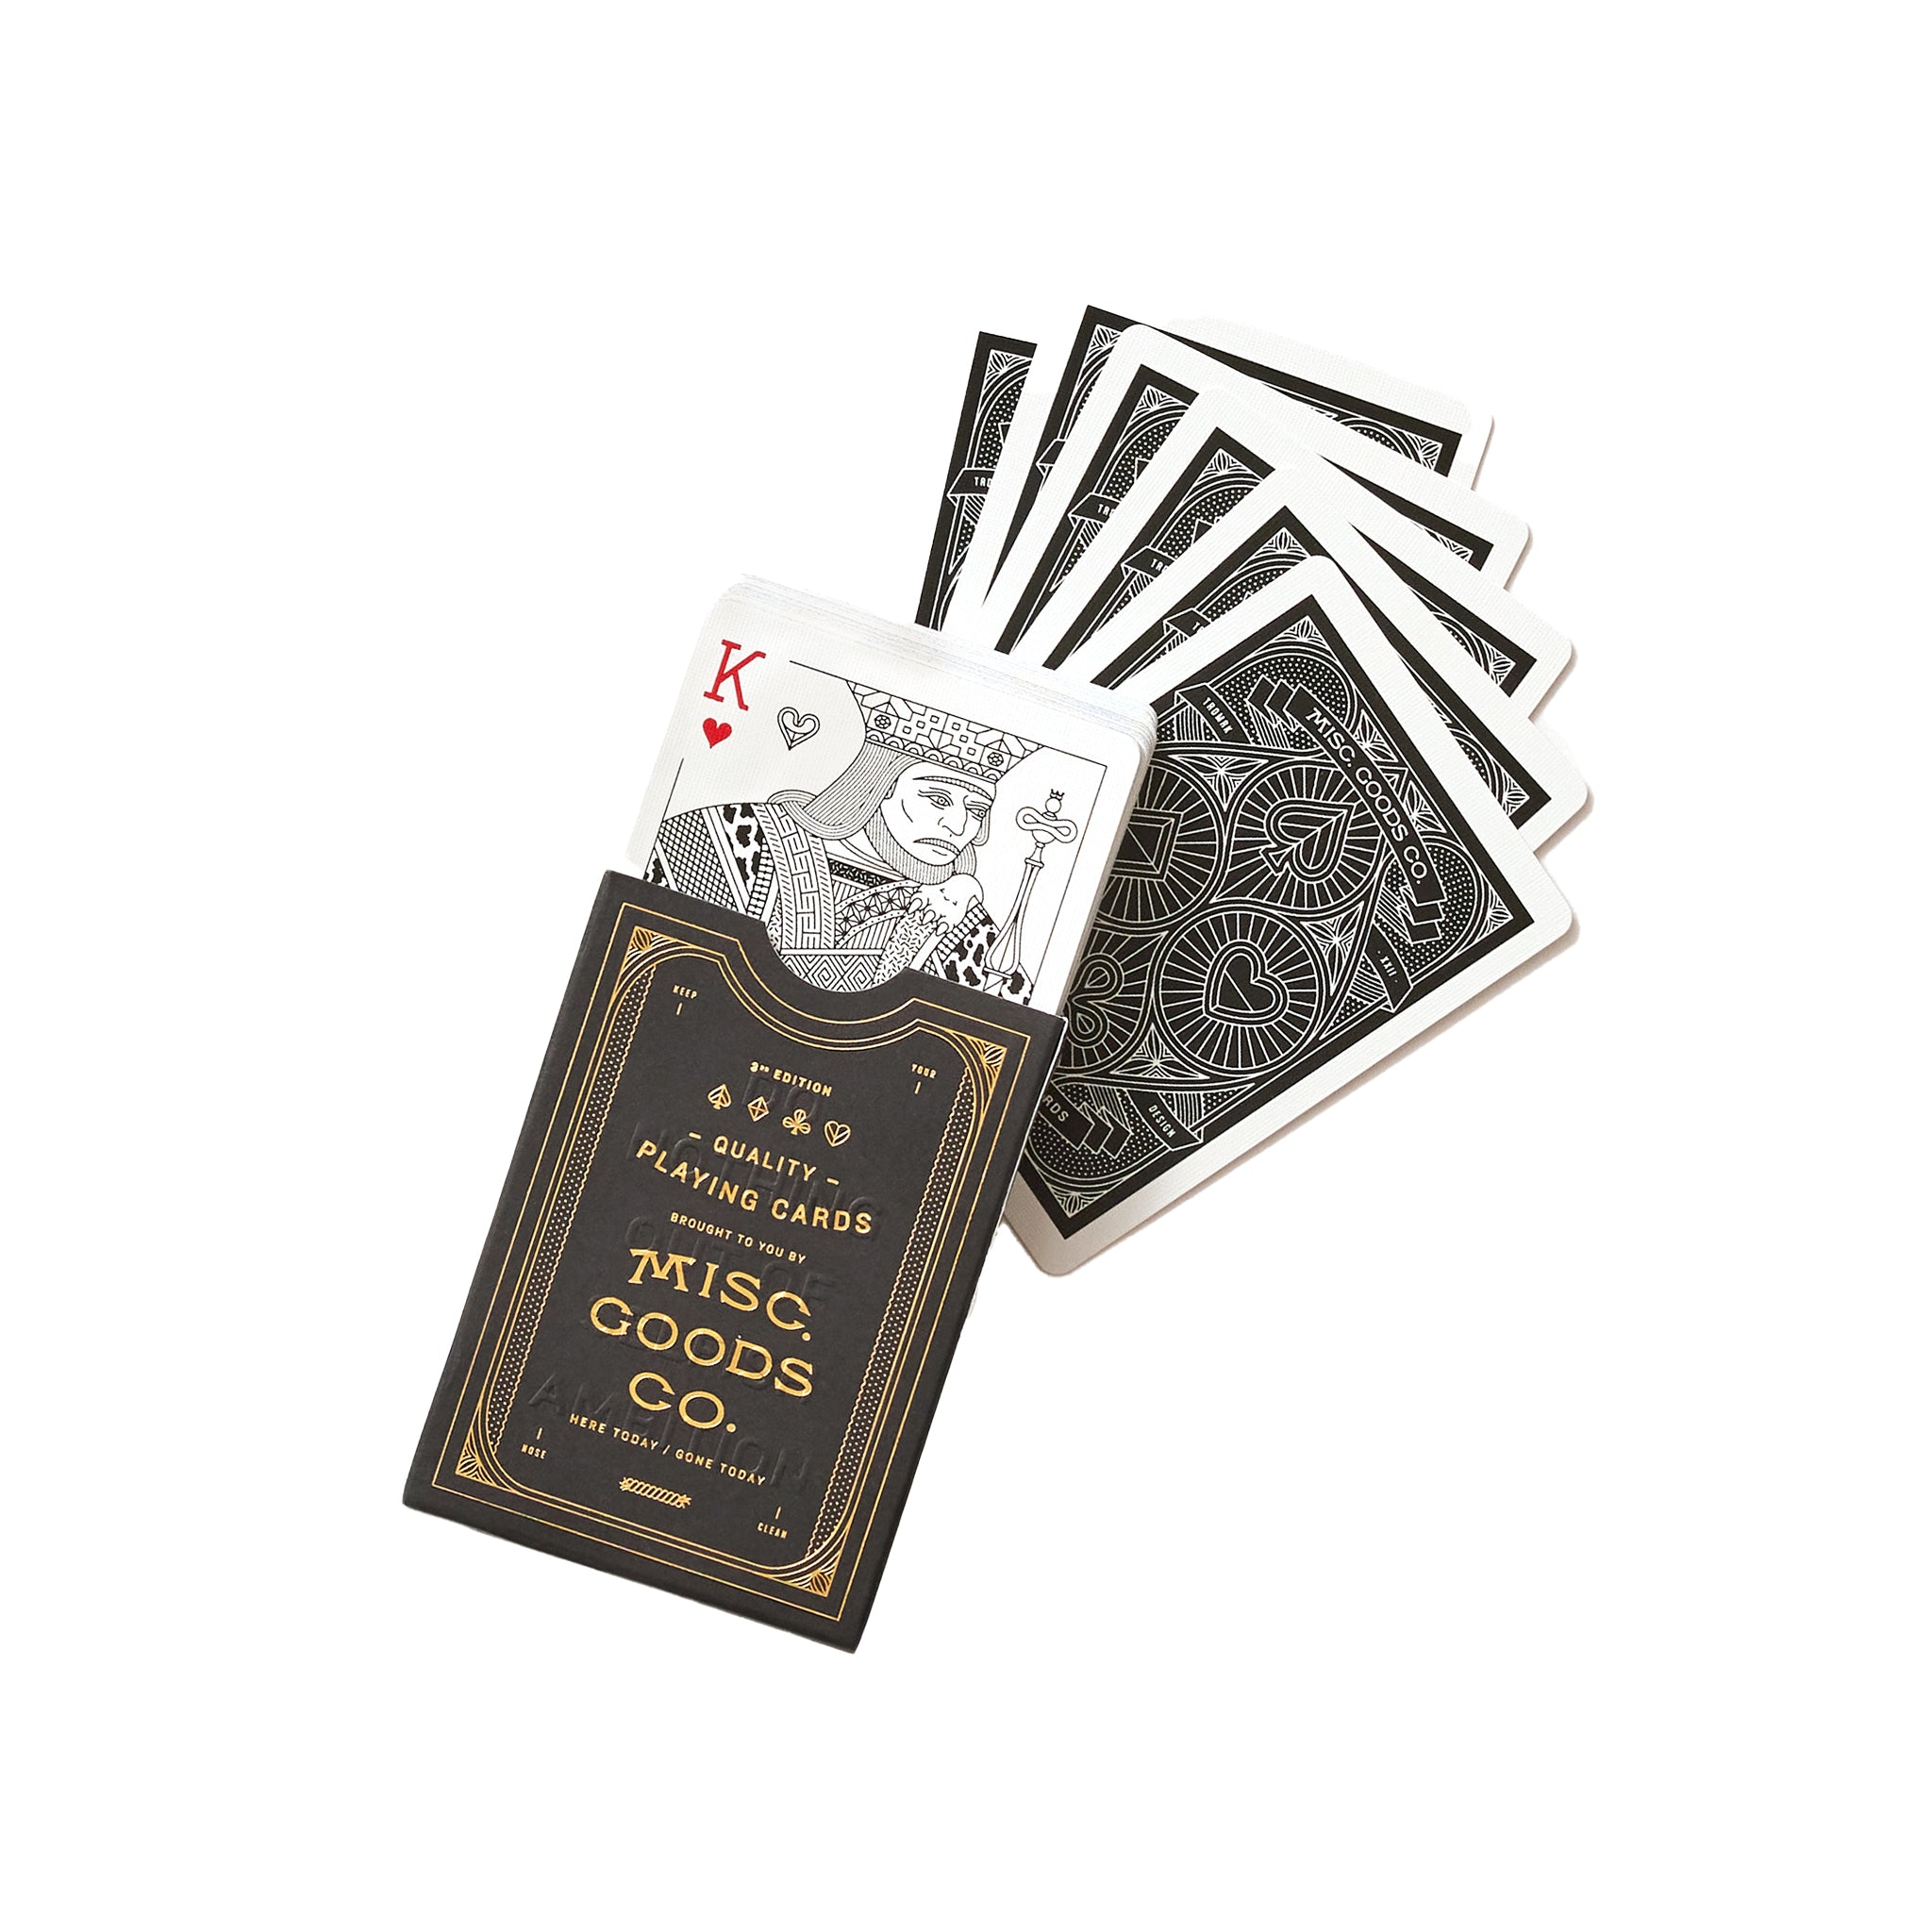 A fan of premium playing cards spread out on a white background, with the King of Hearts card on top displaying a detailed illustration. The back design of the cards is ornate with black and white patterns. The box of the playing cards, with gold and black design, states 'MISC GOODS CO. Quality Playing Cards' and includes the tagline 'They haven't been made, till we make them.' The overall design suggests a luxurious and modern take on the classic deck of cards.